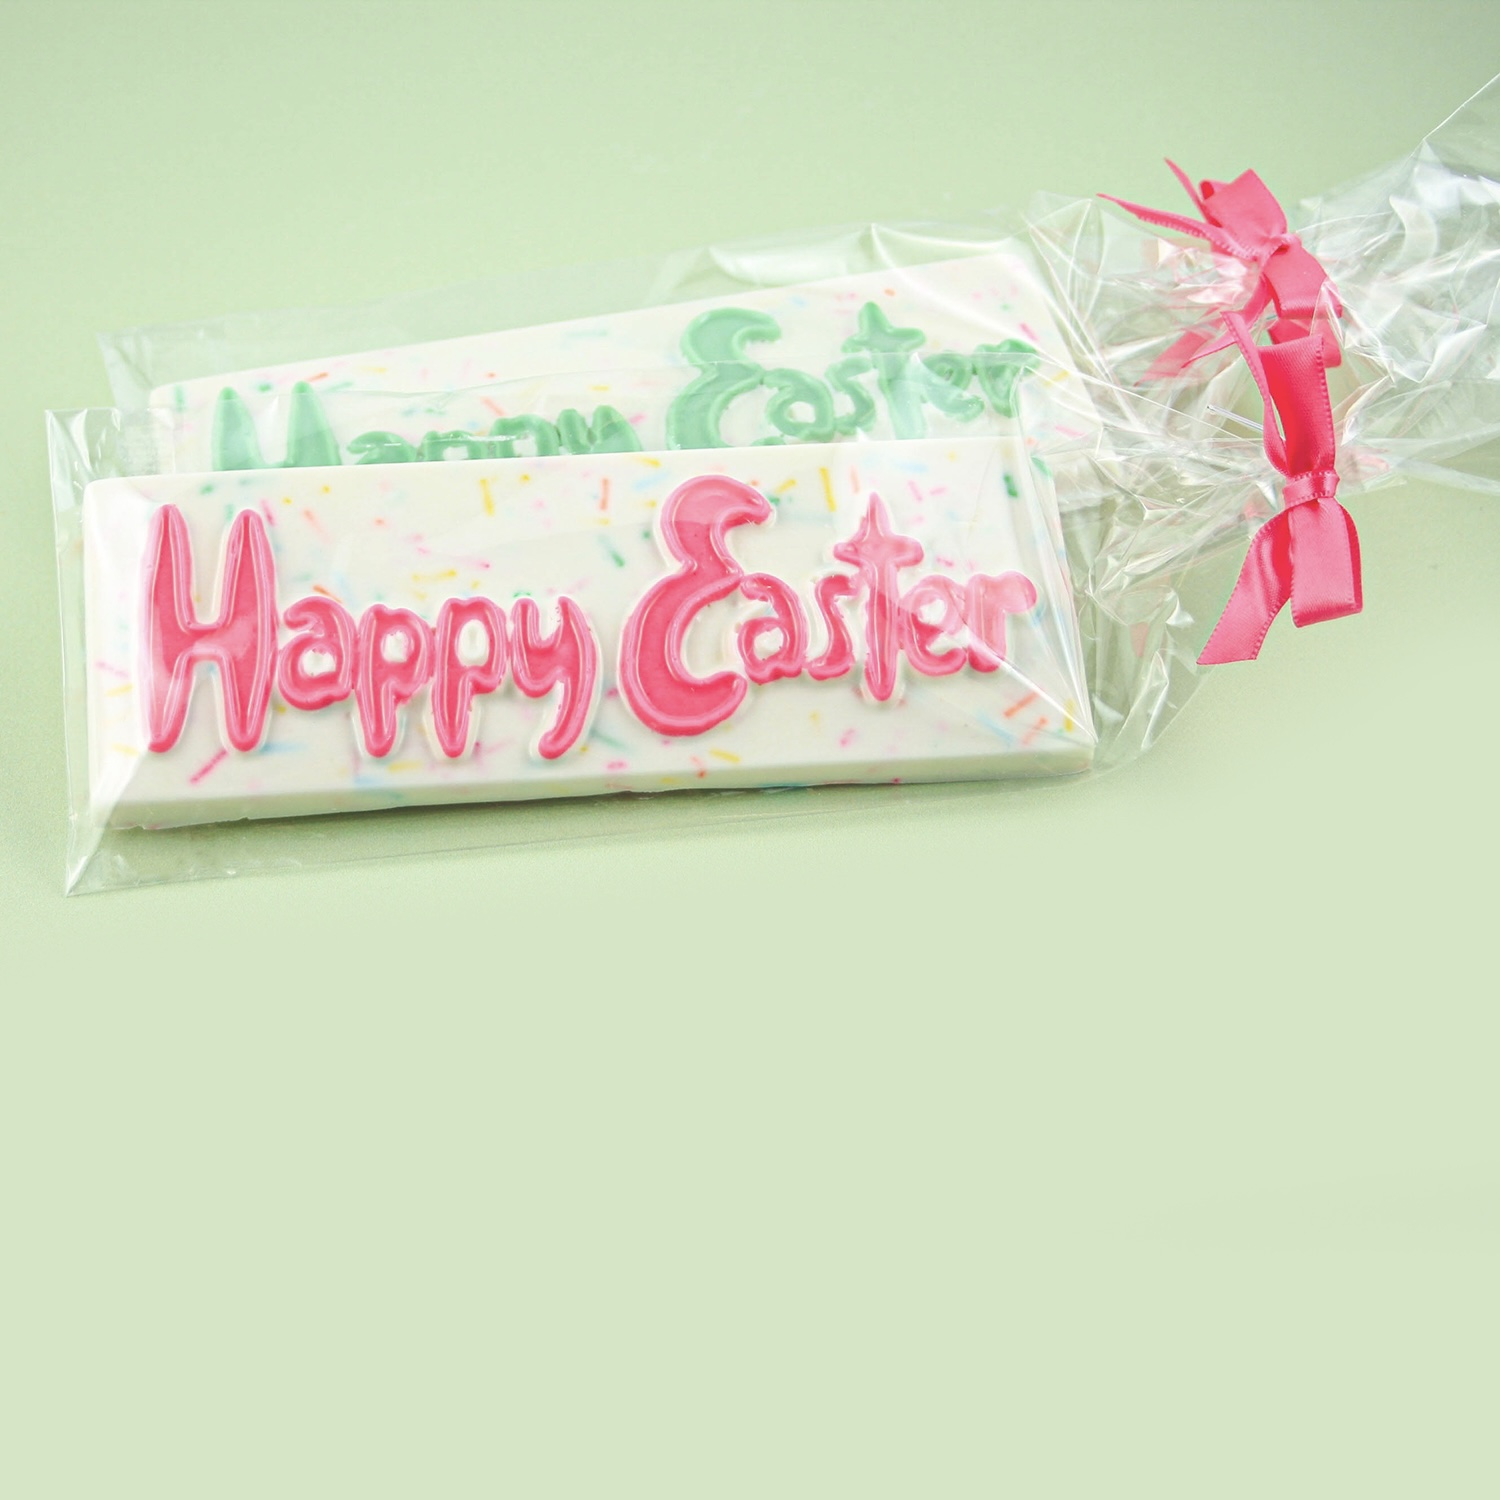 Happy Easter chocolate molded candy bar